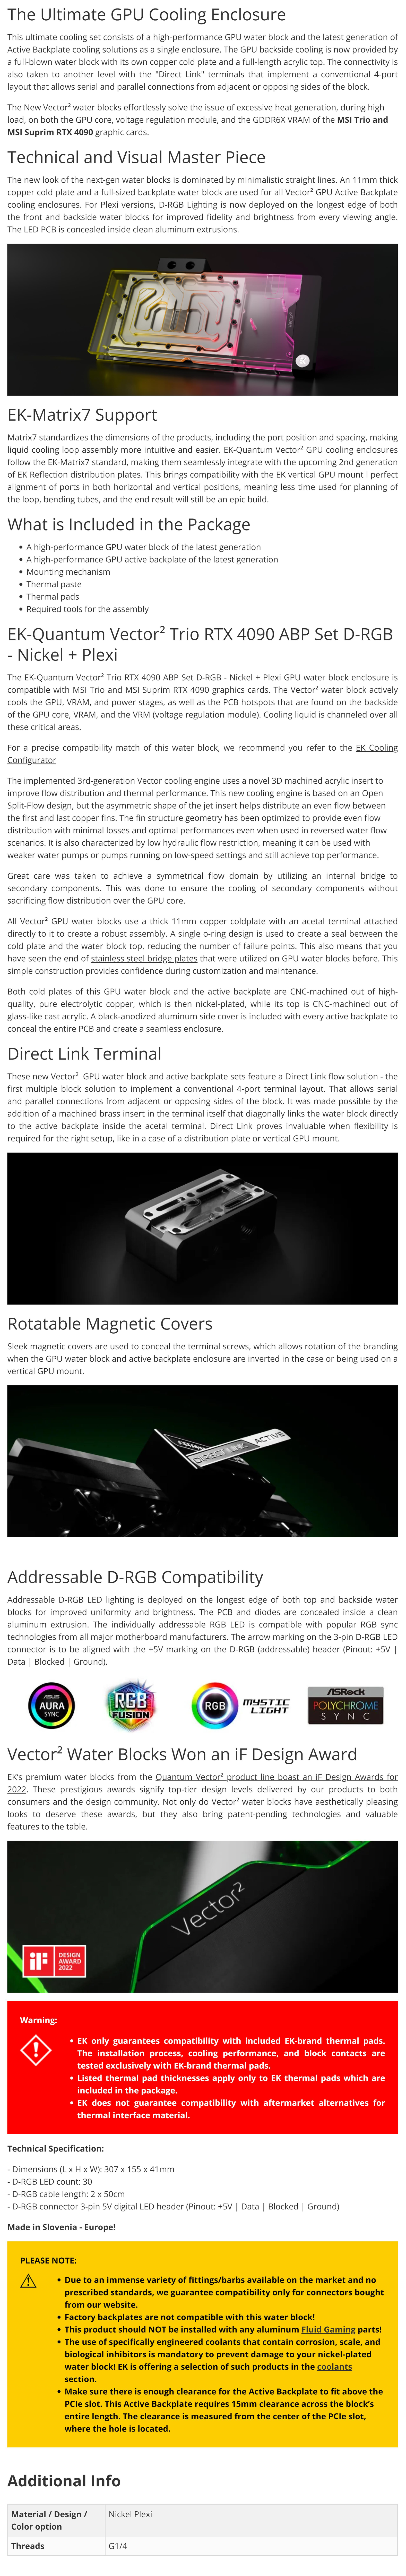 A large marketing image providing additional information about the product EK Quantum Vector2 Trio RTX 4090 D-RGB ABP Set GPU Waterblock - Nickel + Plexi - Additional alt info not provided